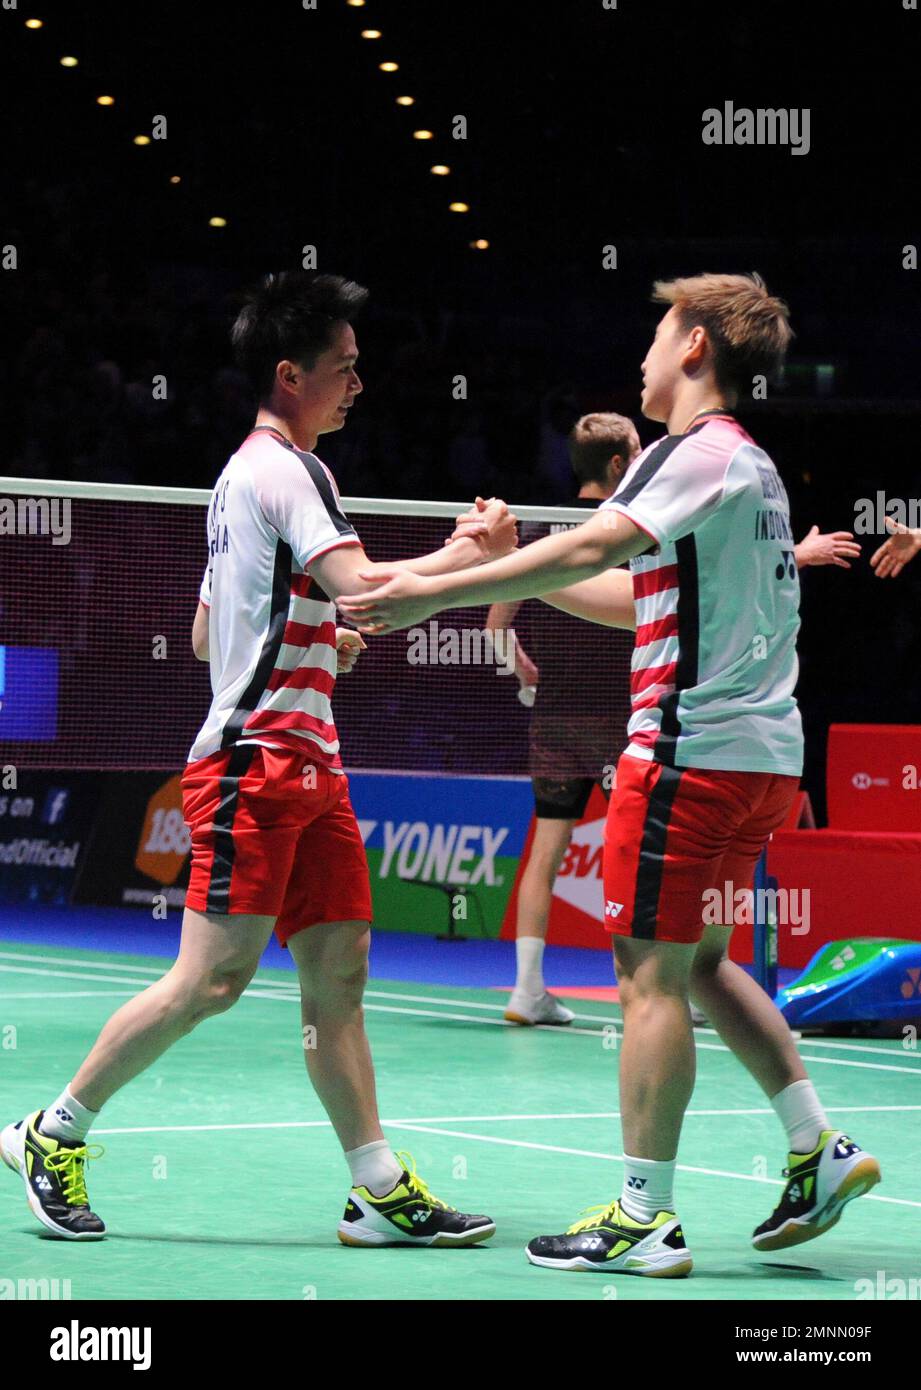 Indonesias Marcus Fernaldi Gideon and Kevin Sanjaya Sukamuljo, left, celebrate after defeating Denmarks Mathias Boe and Carsten Mogensen in the mens doubles final match at the All England Open Badminton tournament in